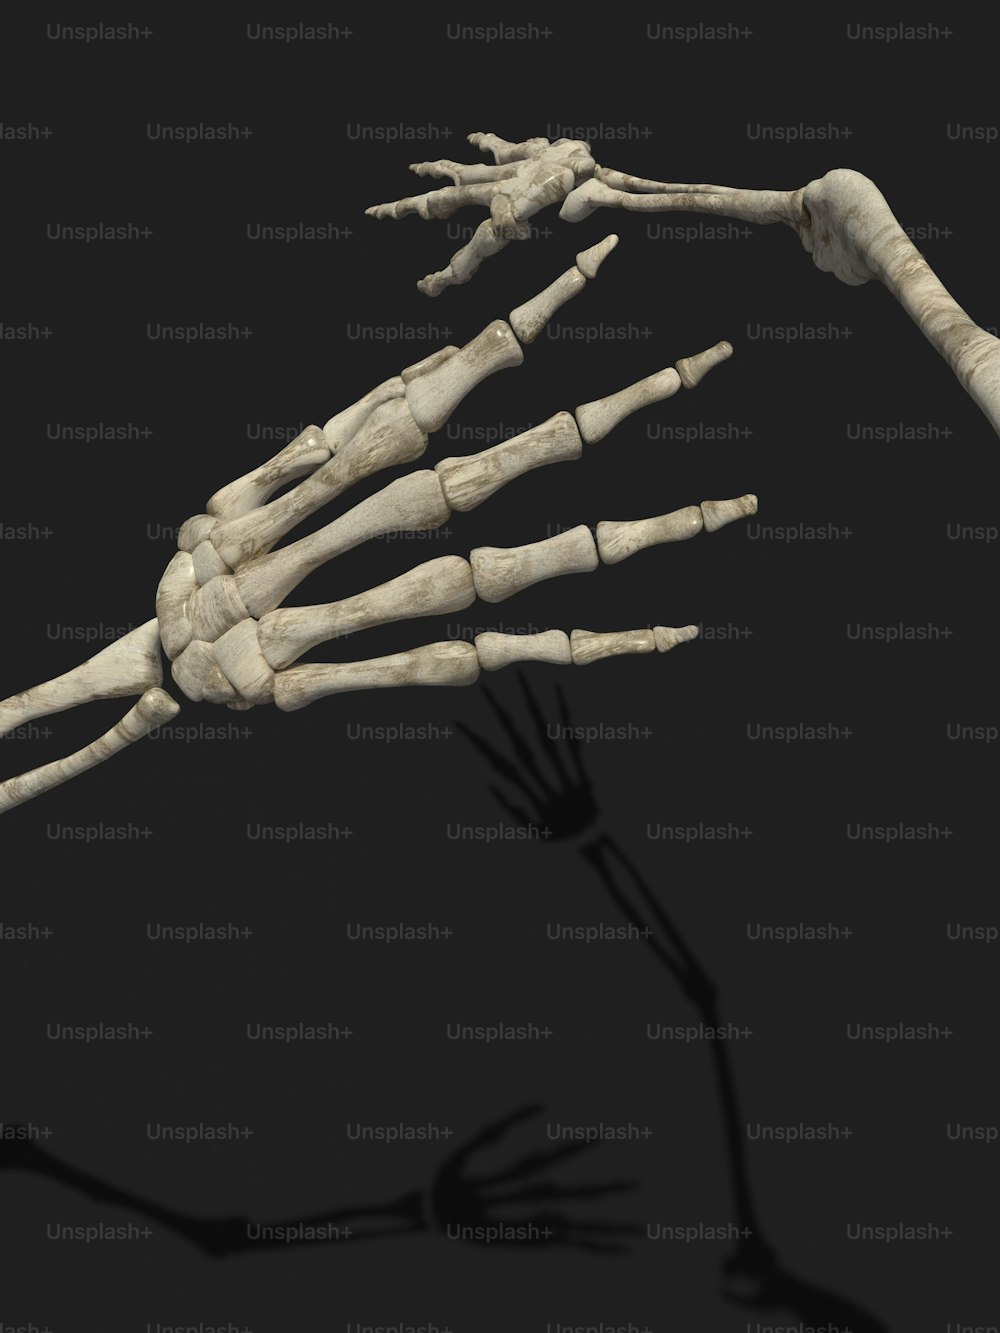 the skeleton of a person is shown in this image